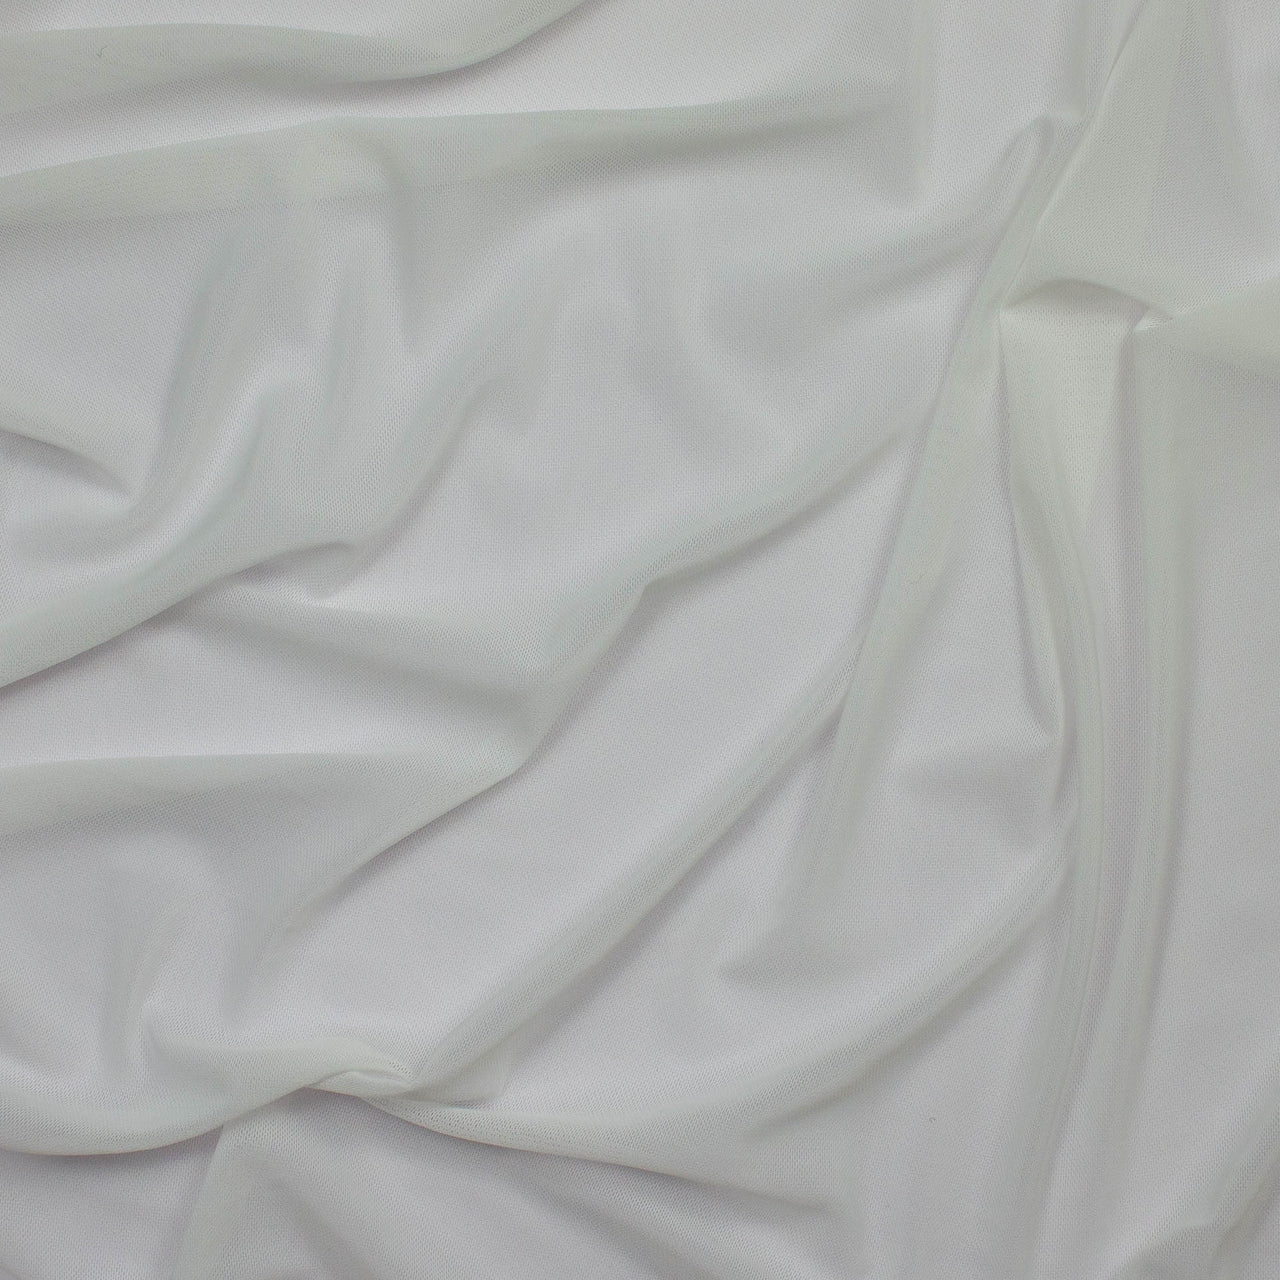 Sublimation Fabric - Power Mesh Net Polyester based - Prepared for Print Fabric